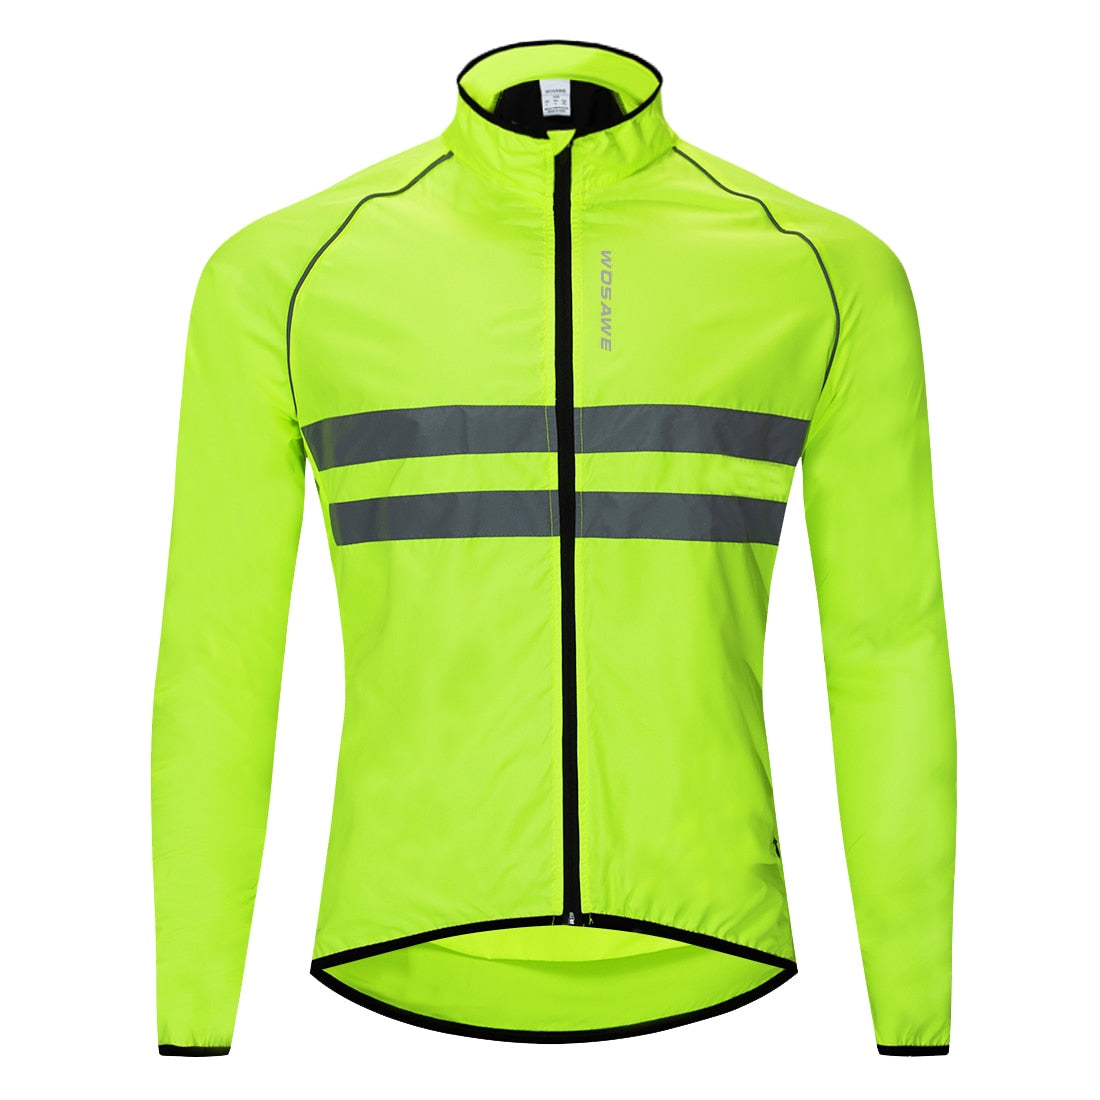 WOSAWE Thin Hooded Reflective Rain Repellent Jacket - Green / M - Sport Finesse